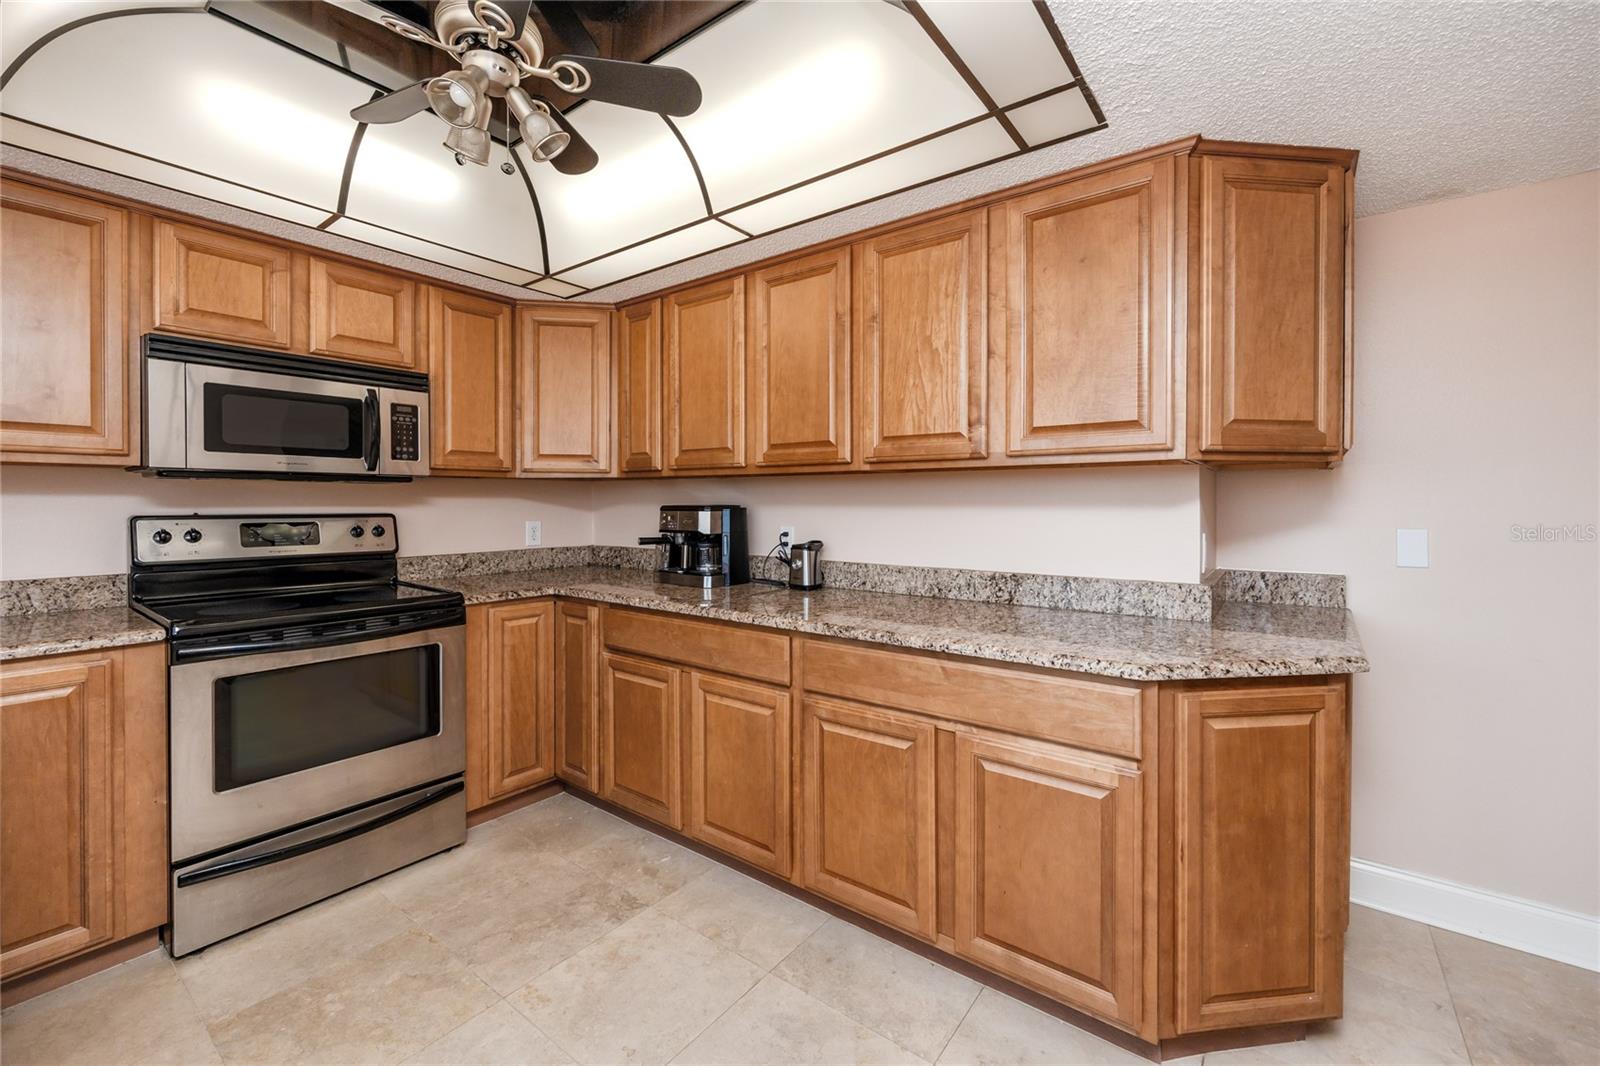 Lots of countertop space and cabinets for storage.